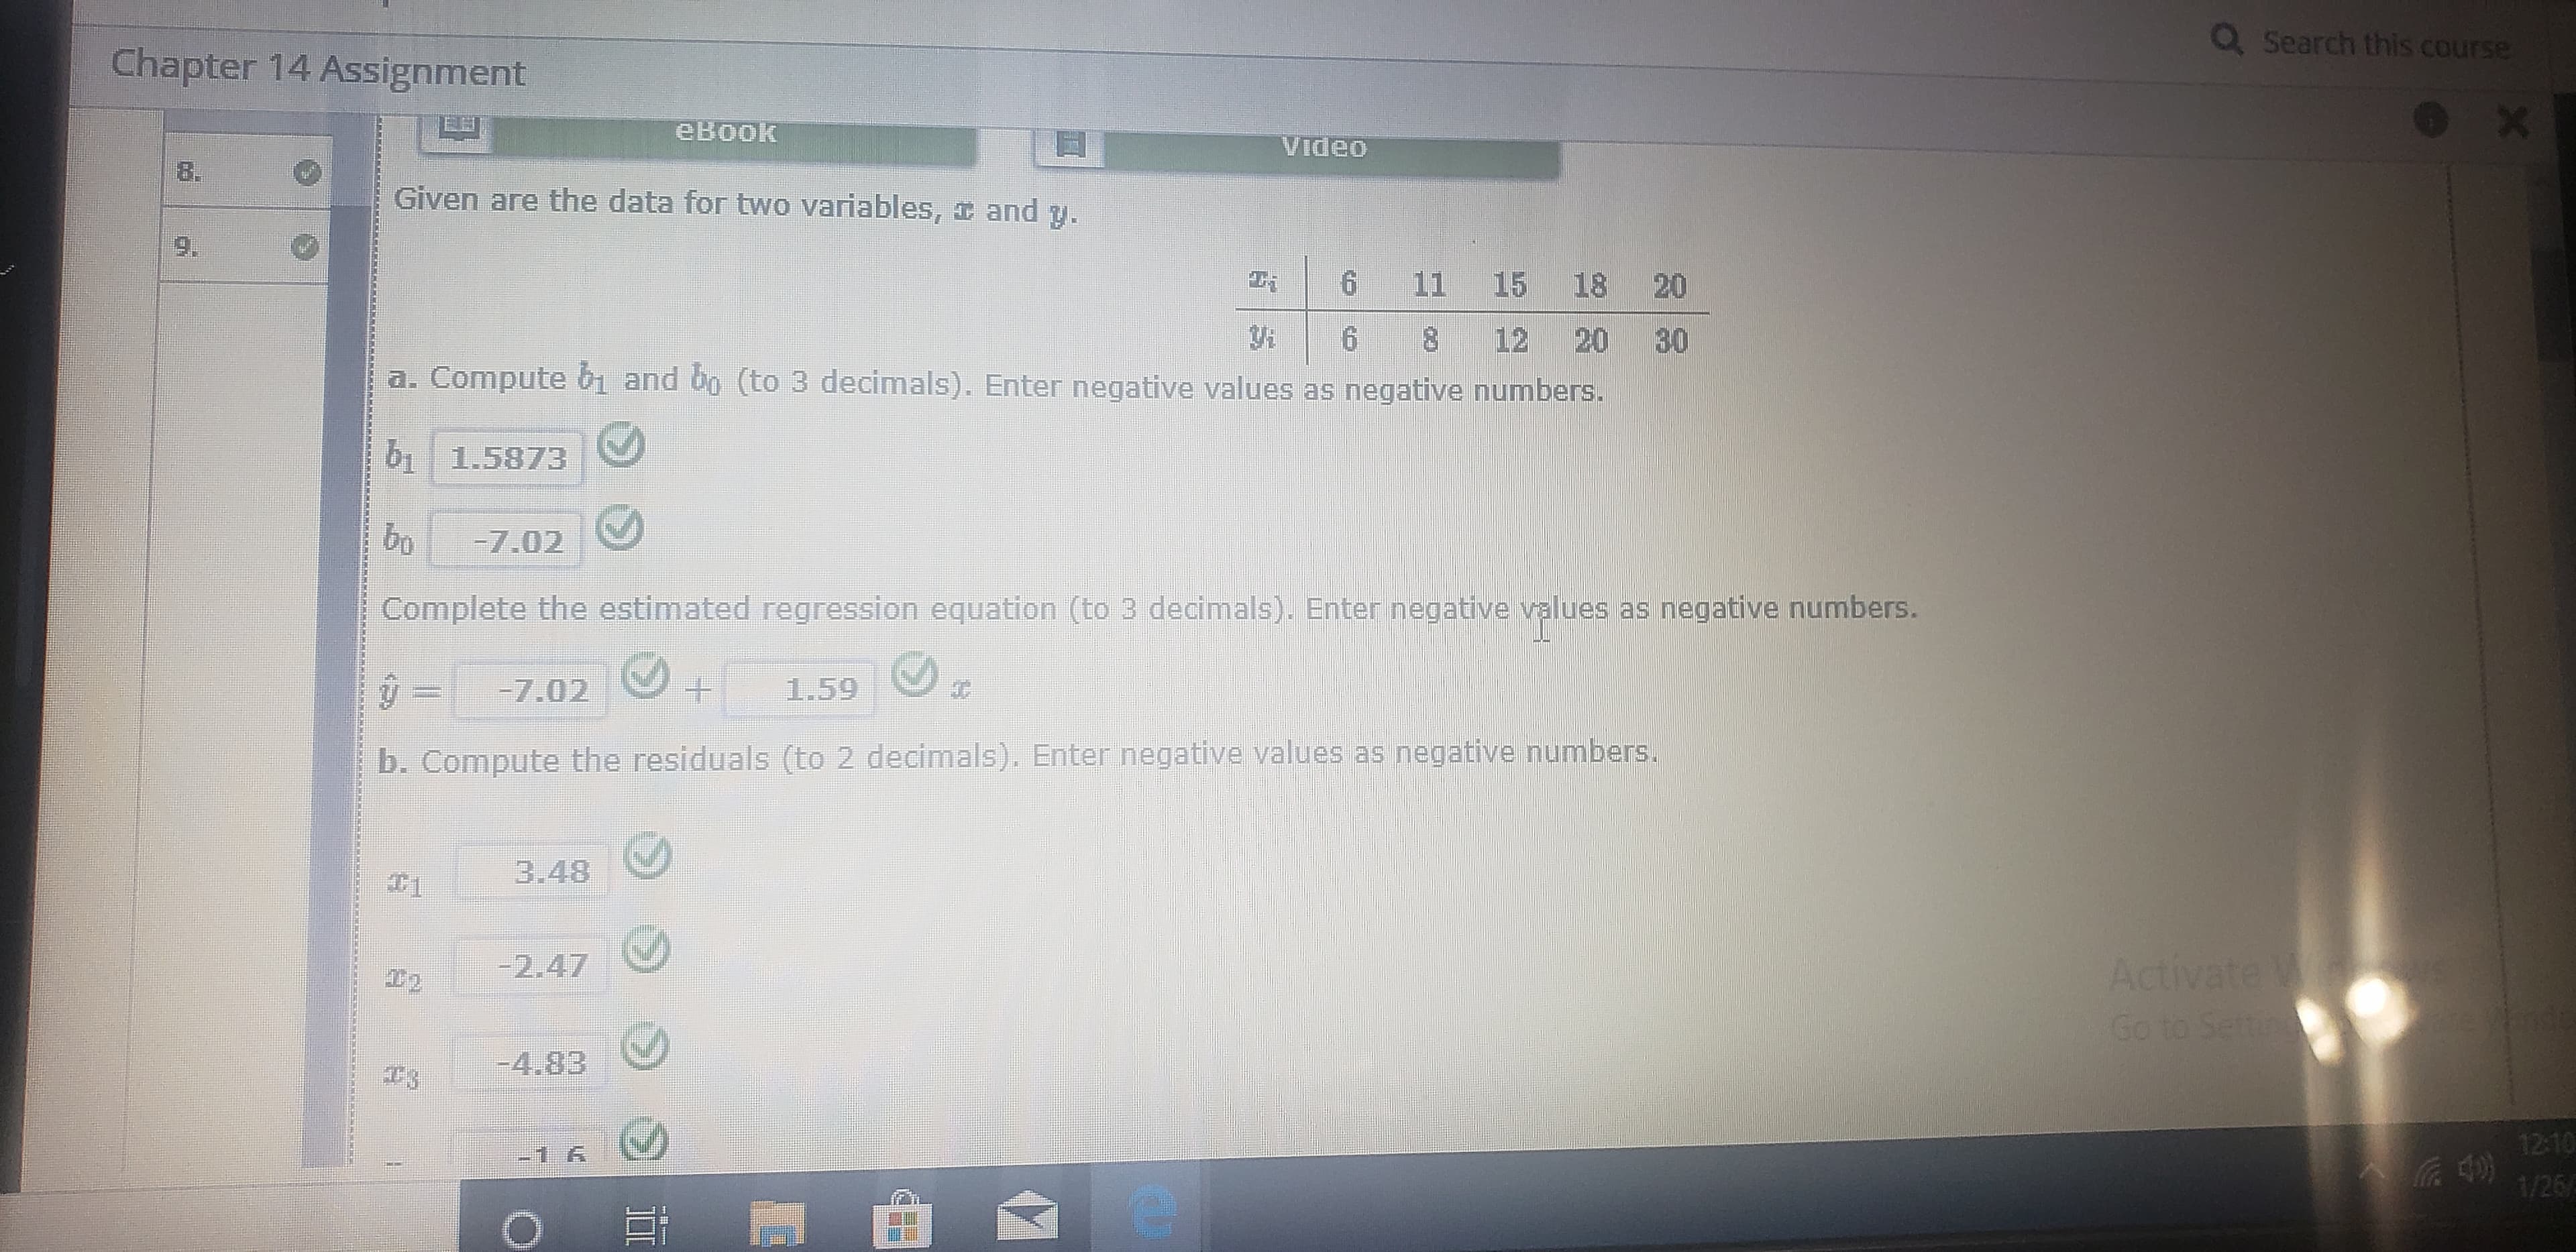 Q Search this course
Chapter 14 Assignment
евоок
Video
8.
Given are the data for two variables, I and y.
11
15
18 20
8 12
30
20
a. Compute
and op (to 3 decimals). Enter negative values as negative numbers.
bi 1.5873
-7.02
Complete the estimated regression equation (to 3 decimals). Enter negative values as negative numbers.
-7.02
1.59
b. Compute the residuals (to 2 decimals). Enter negative values as negative numbers.
3.48
Activate W
Go to Settng
-2.47
-4.83
12:10
1/26/
9,
